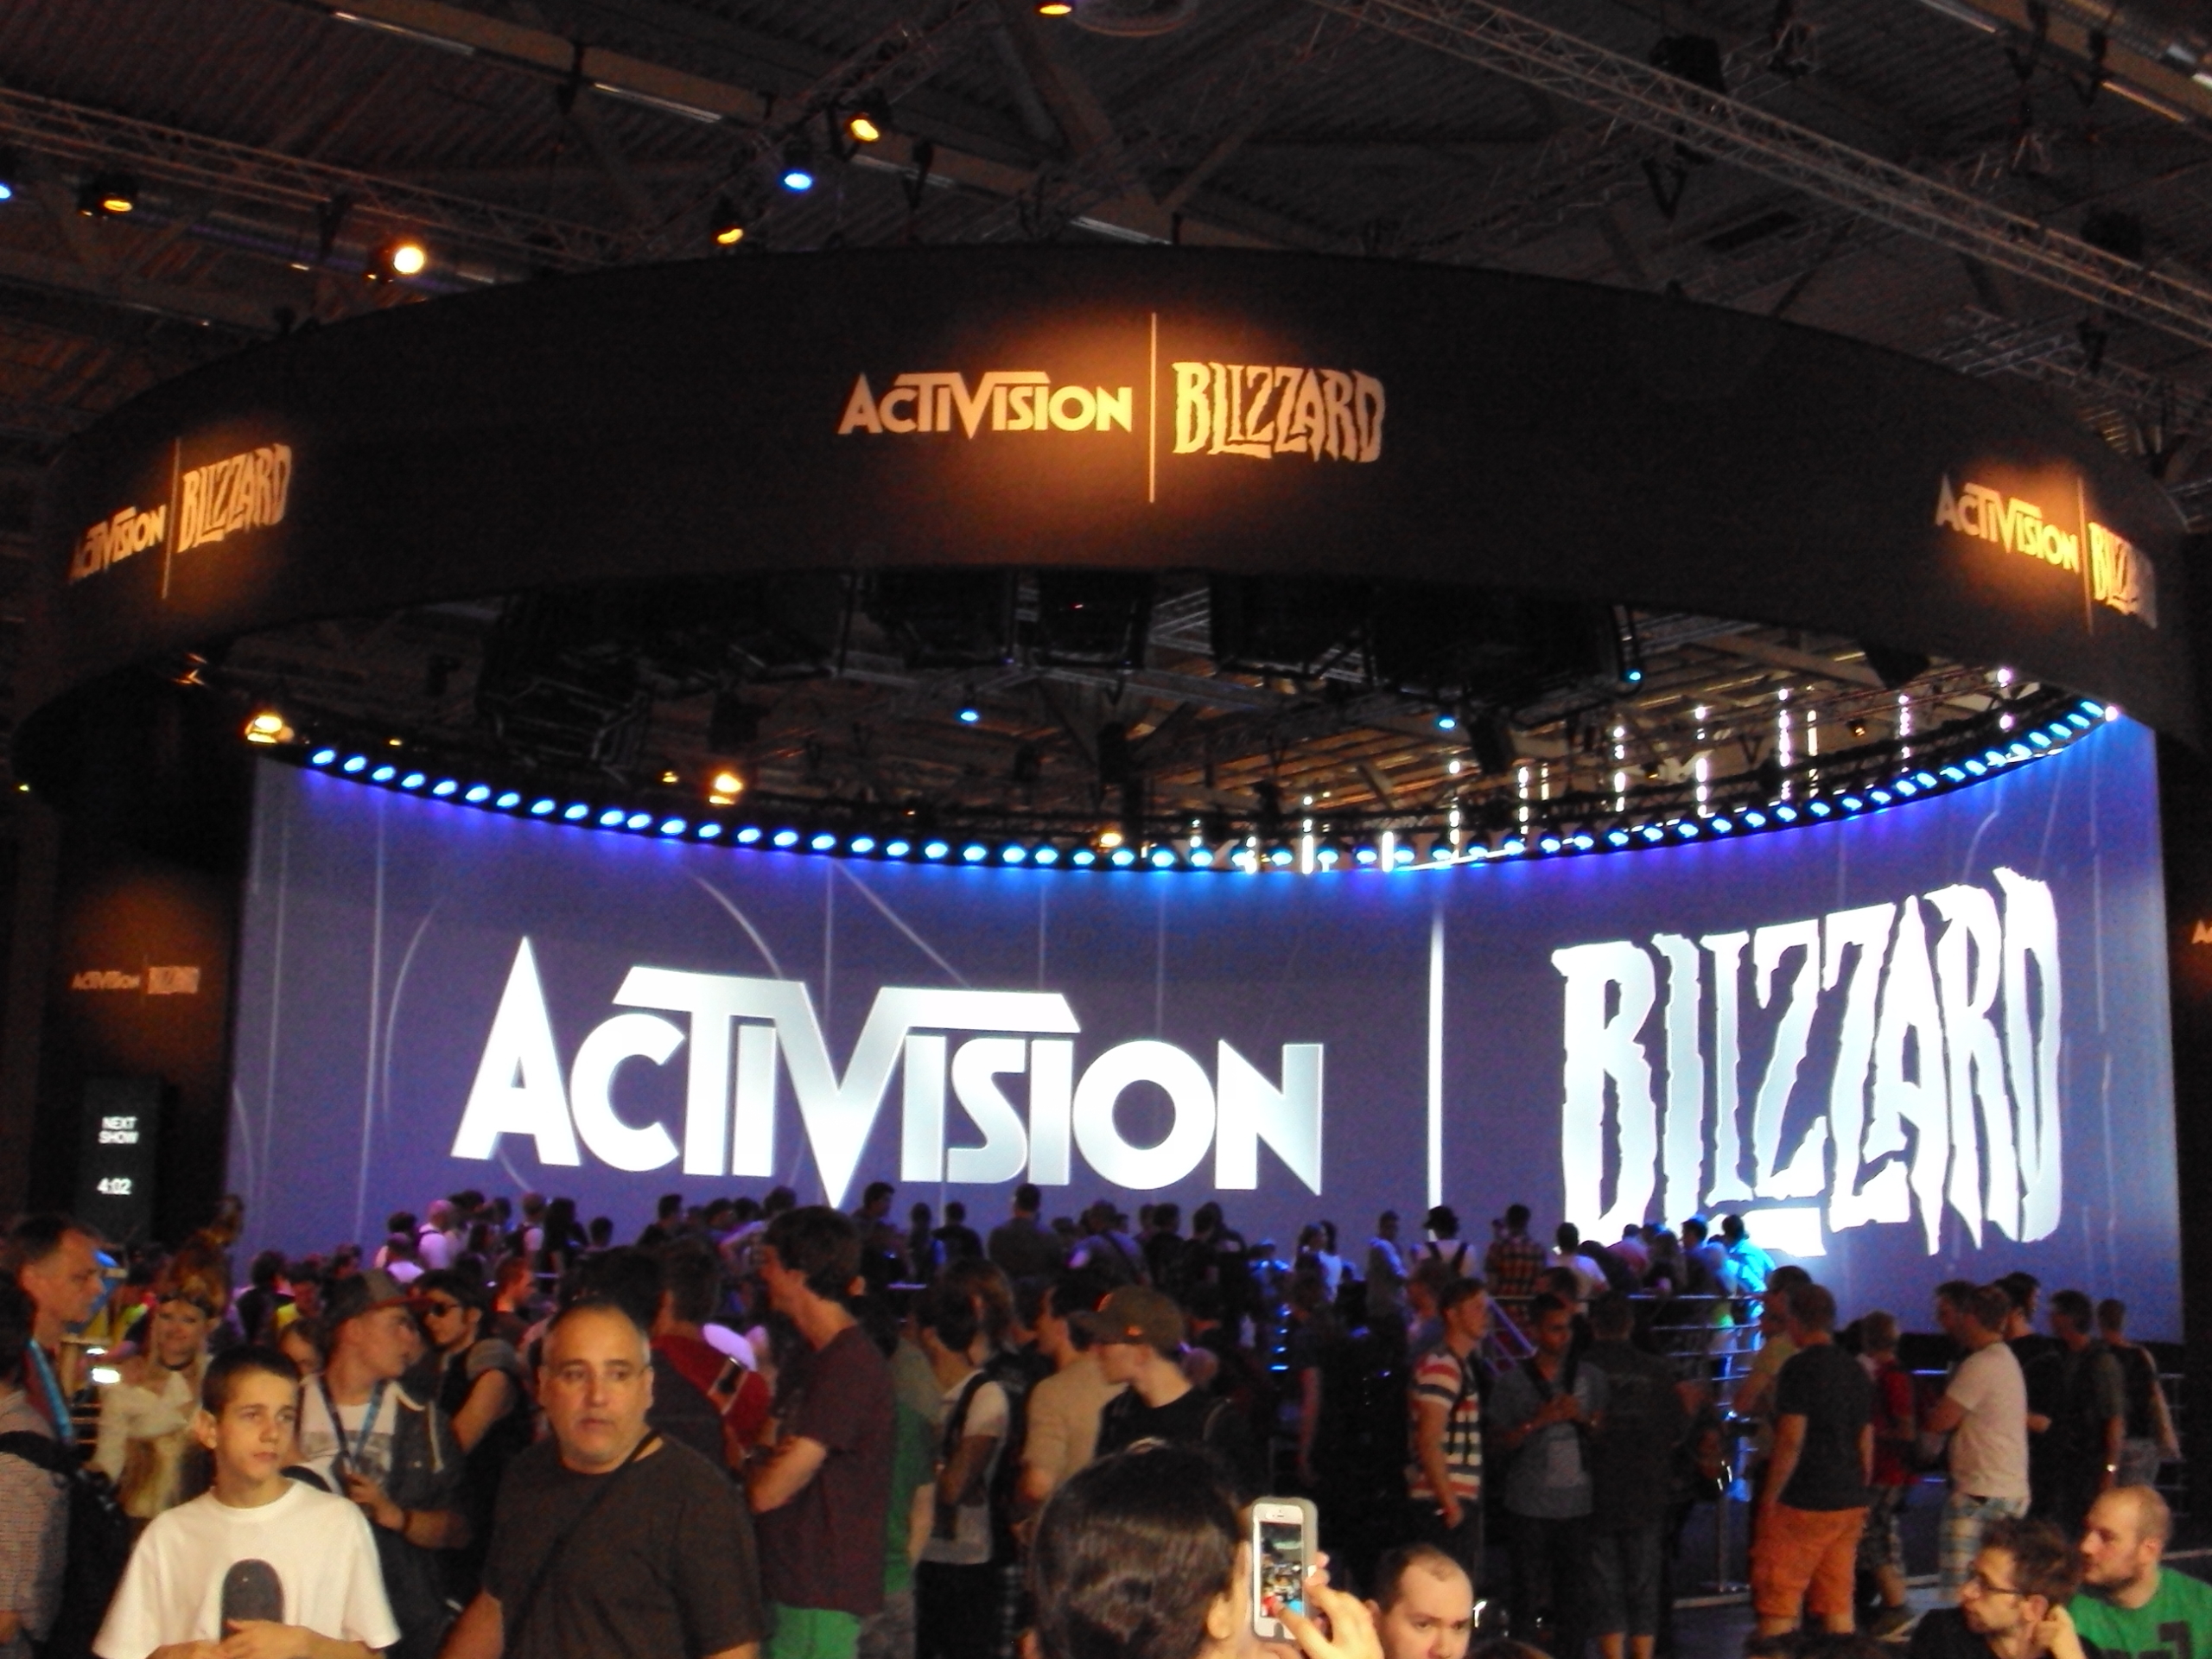 Activision Blizzard sign at gaming convention.